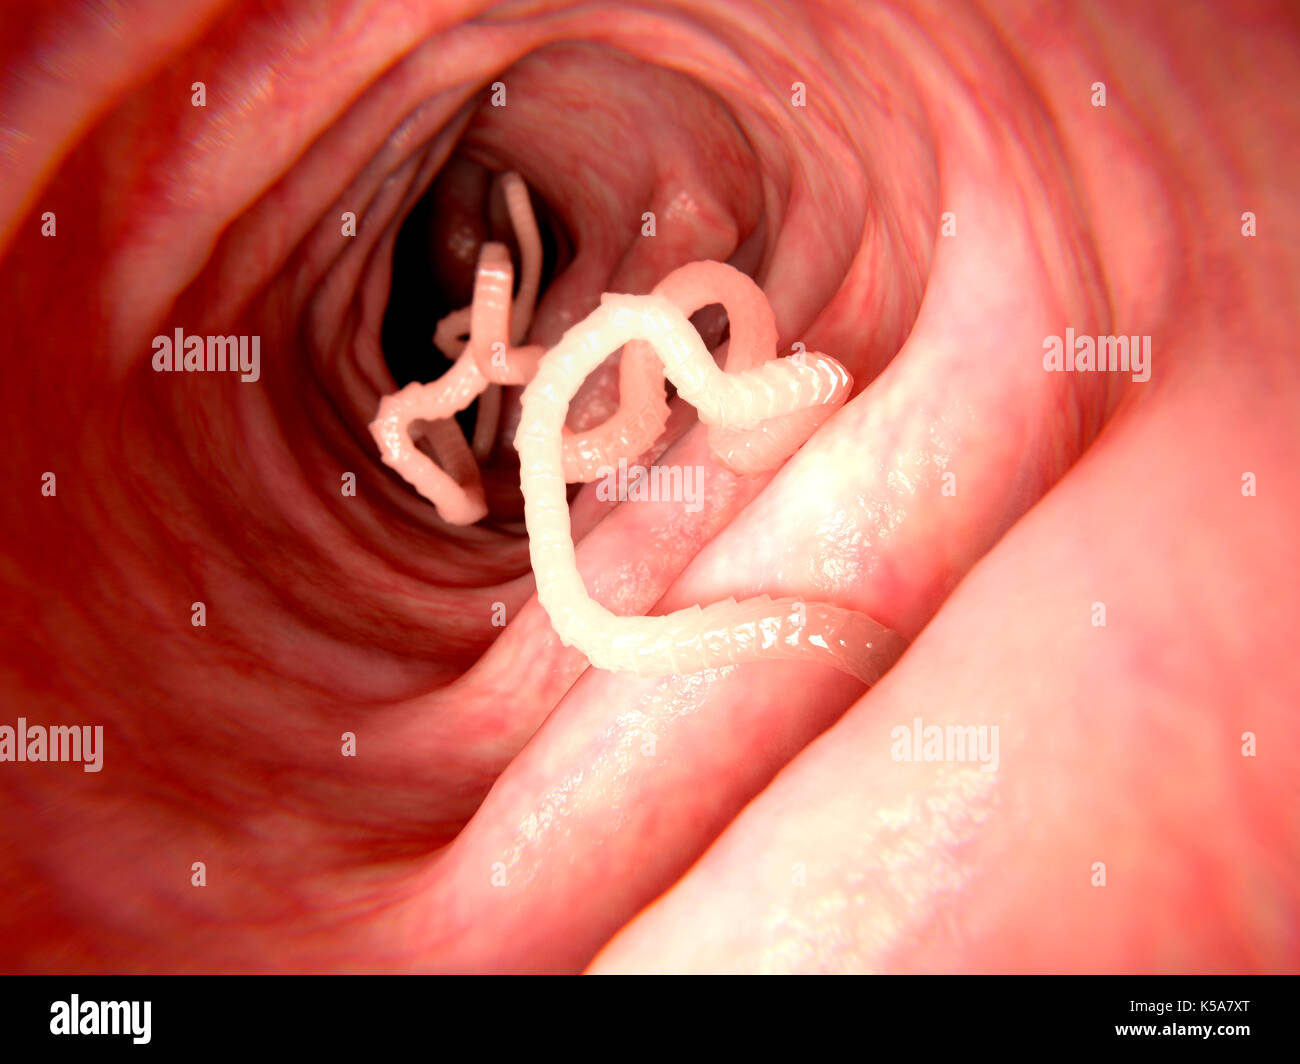 Illustration of a tapeworm in a human intestine. Tapeworms (Taenia sp.) are parasites that inhabit the human gut. They anchor themselves to the inside of the intestine and absorb nutrients through their body wall. Tapeworms may grow to several metres in length, but infestation does not necessarily cause symptoms. Stock Photo